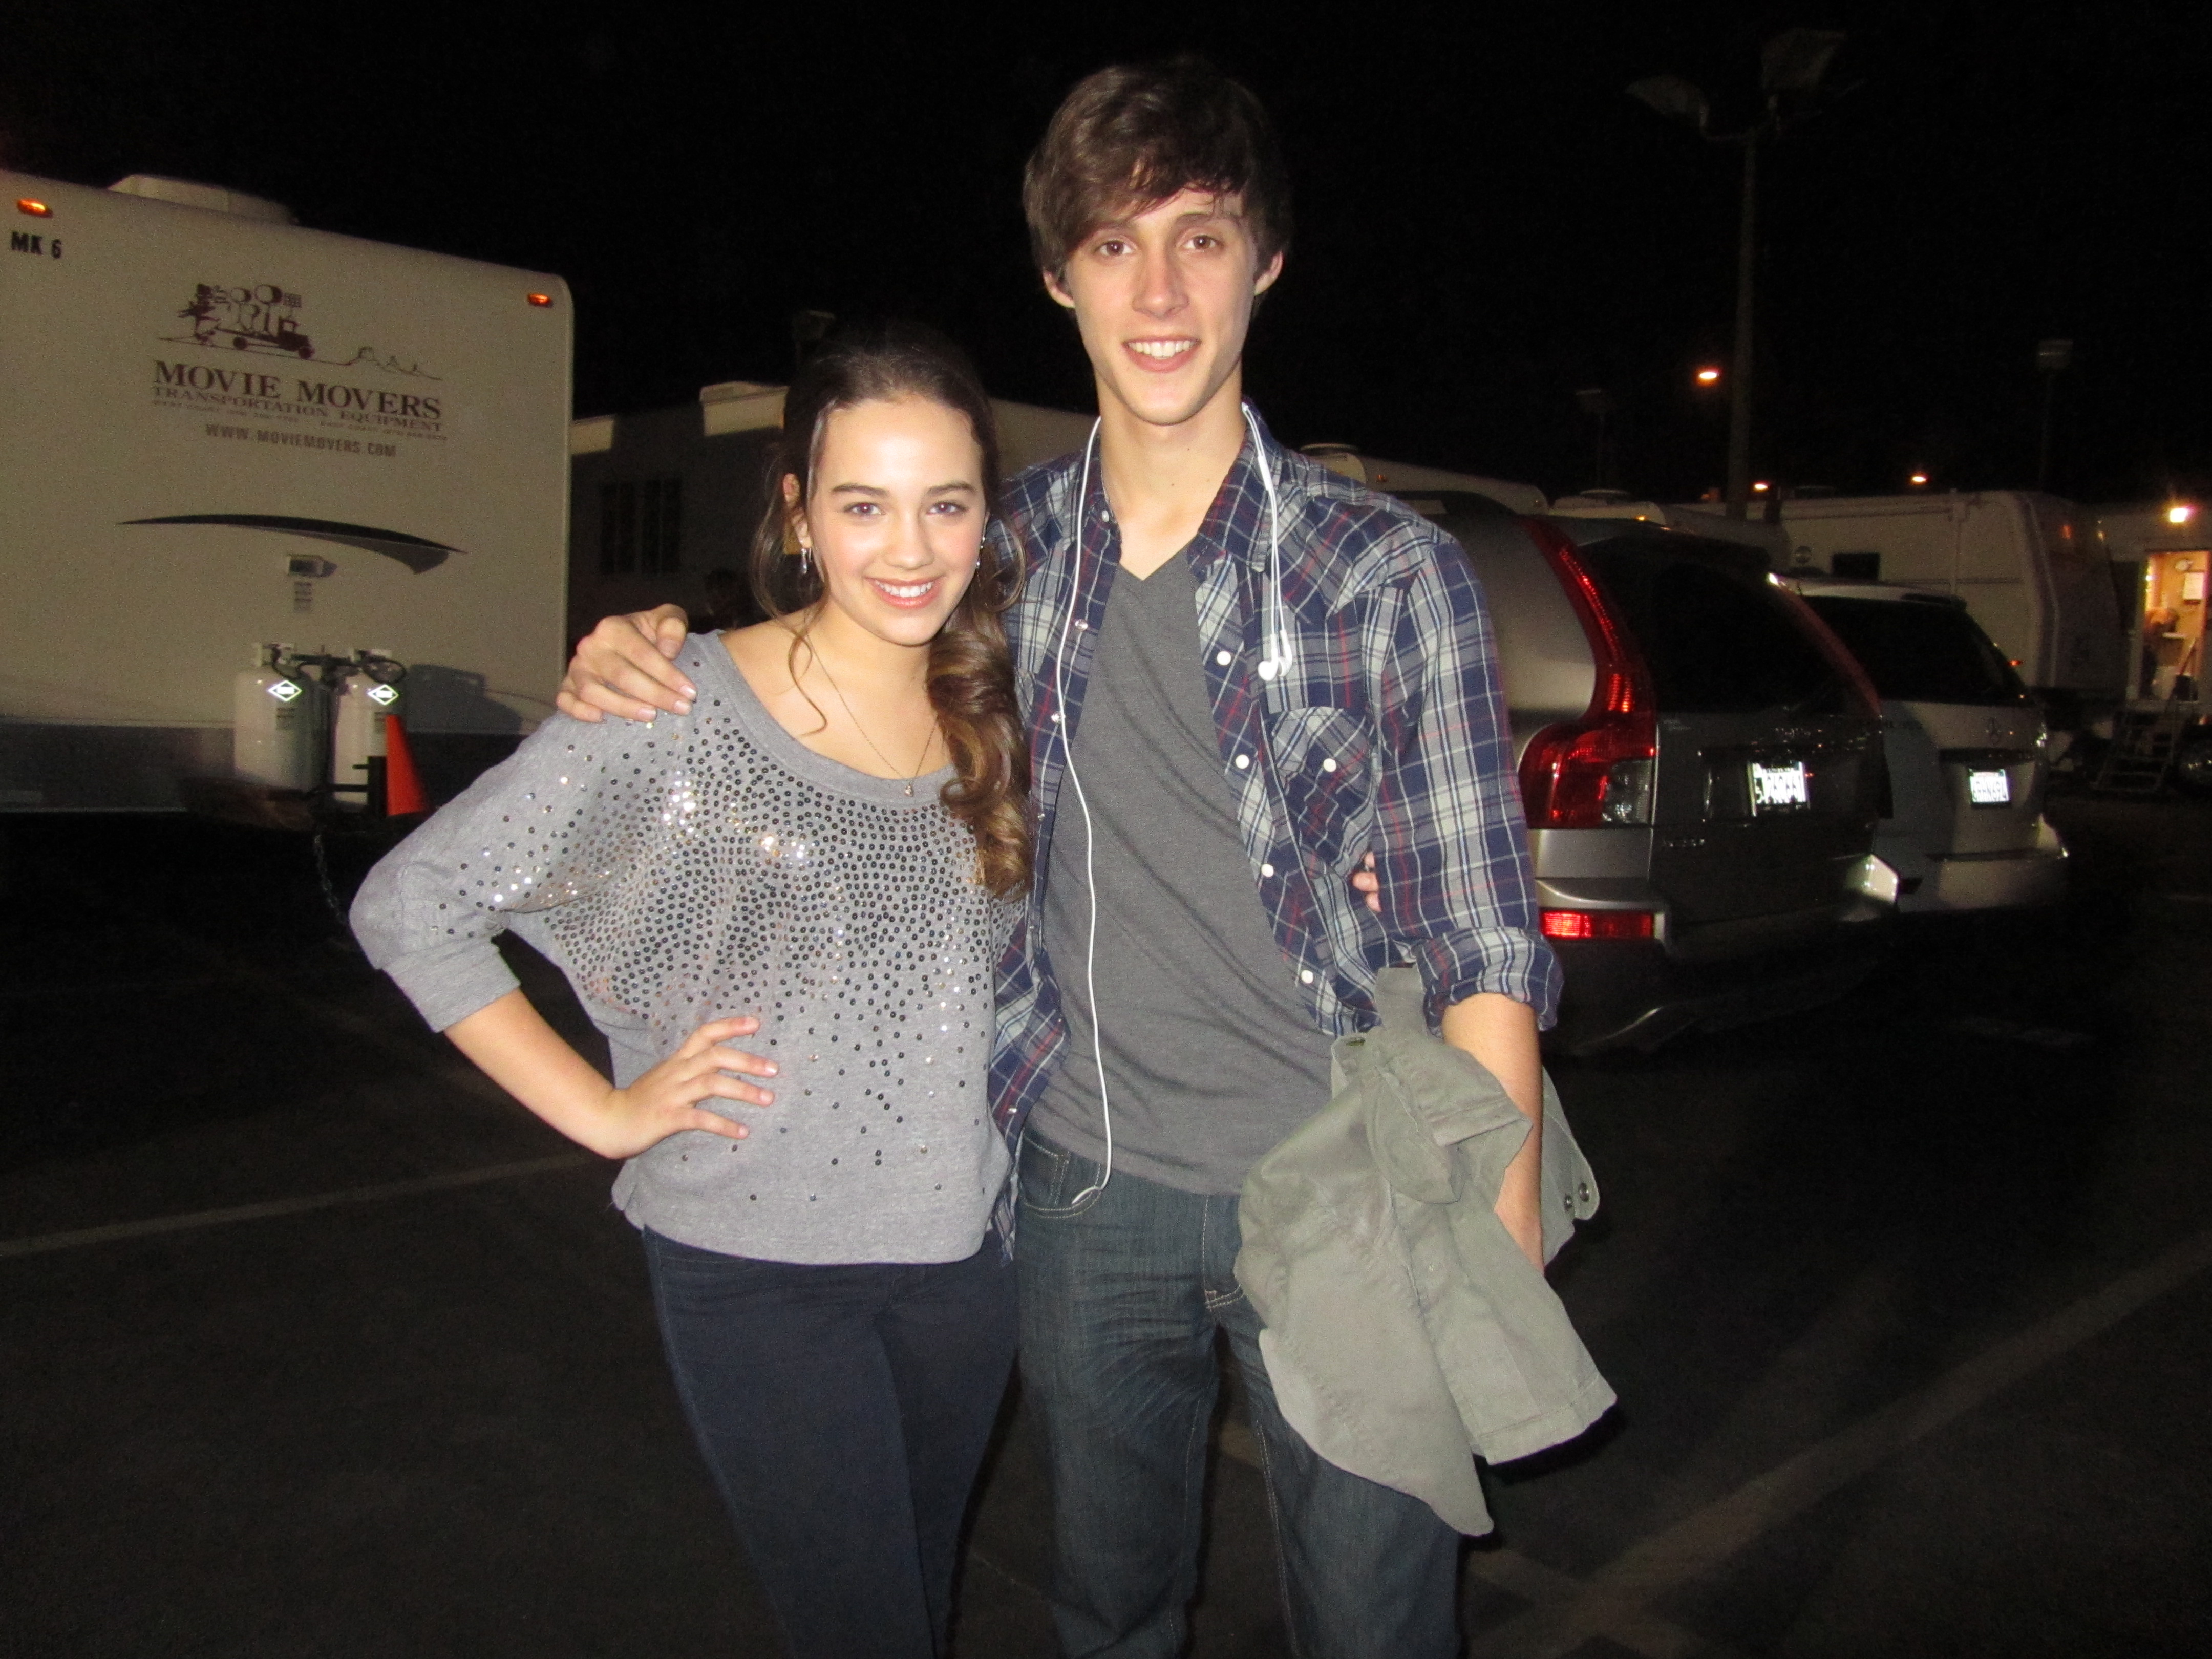 Cameron with Body of Proof's cast member Mary Mouser (plays Lacey on the show - see IMDB site).